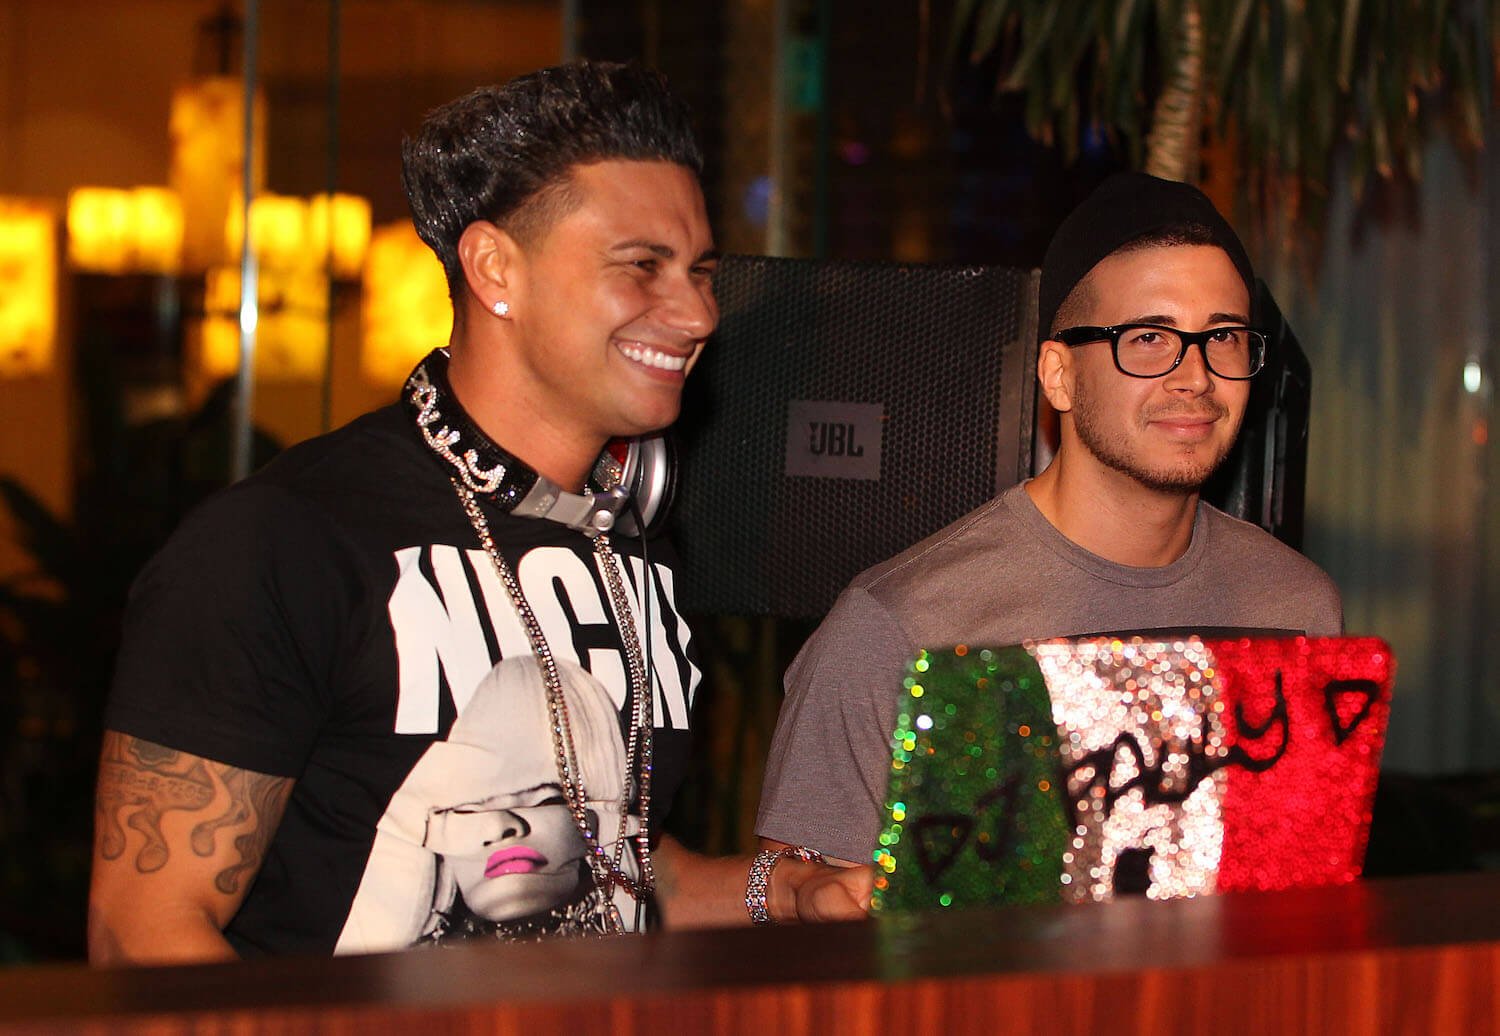 'Jersey Shore: Family Vacation' stars Pauly D and Vinny Guadagnino standing next to each other and laughing